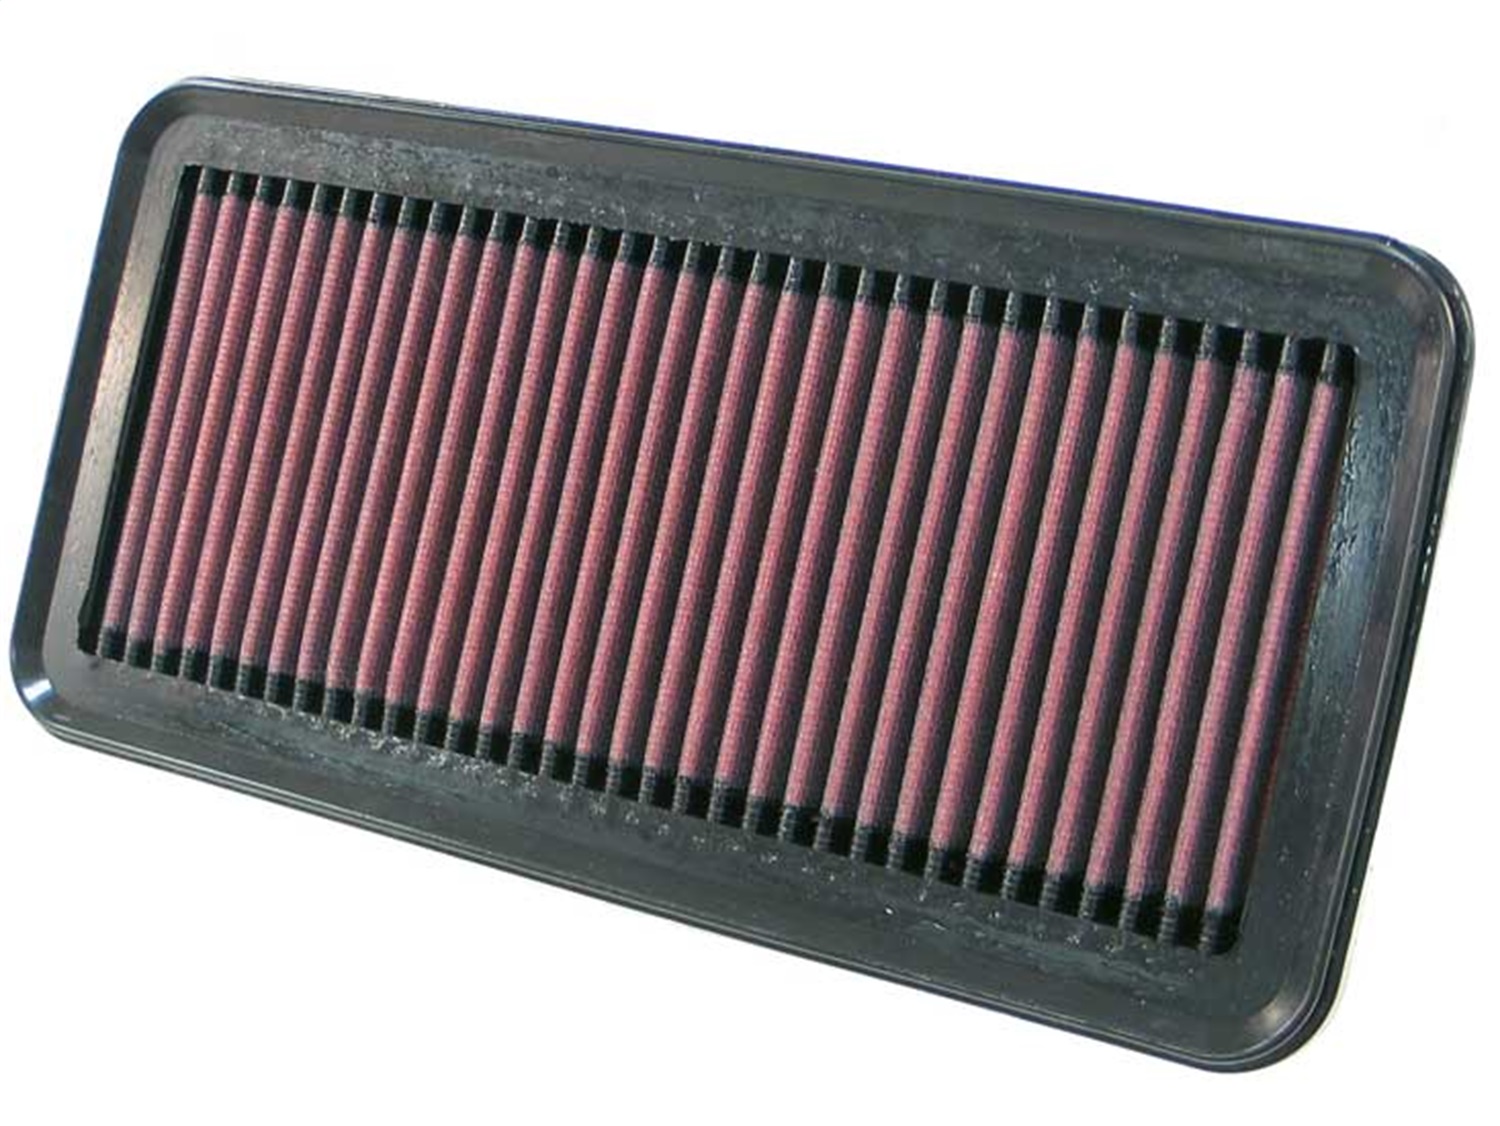 K&N Filters K&N Filters 33-2354 Air Filter Fits 06-11 Accent Rio Rio5